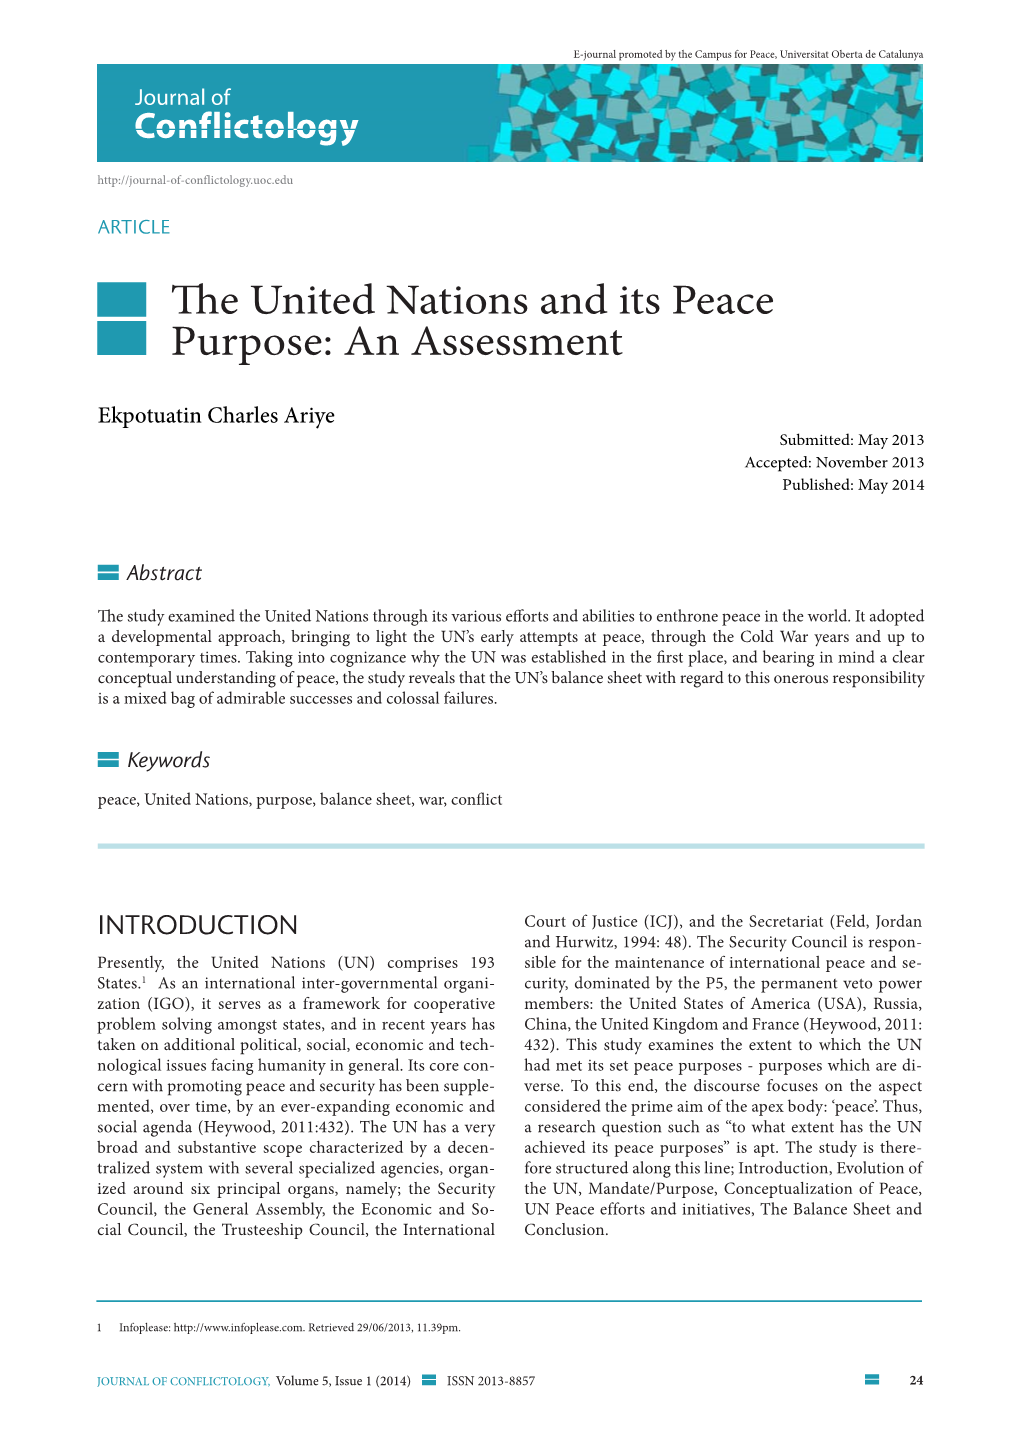 The United Nations and Its Peace Purpose: an Assessment